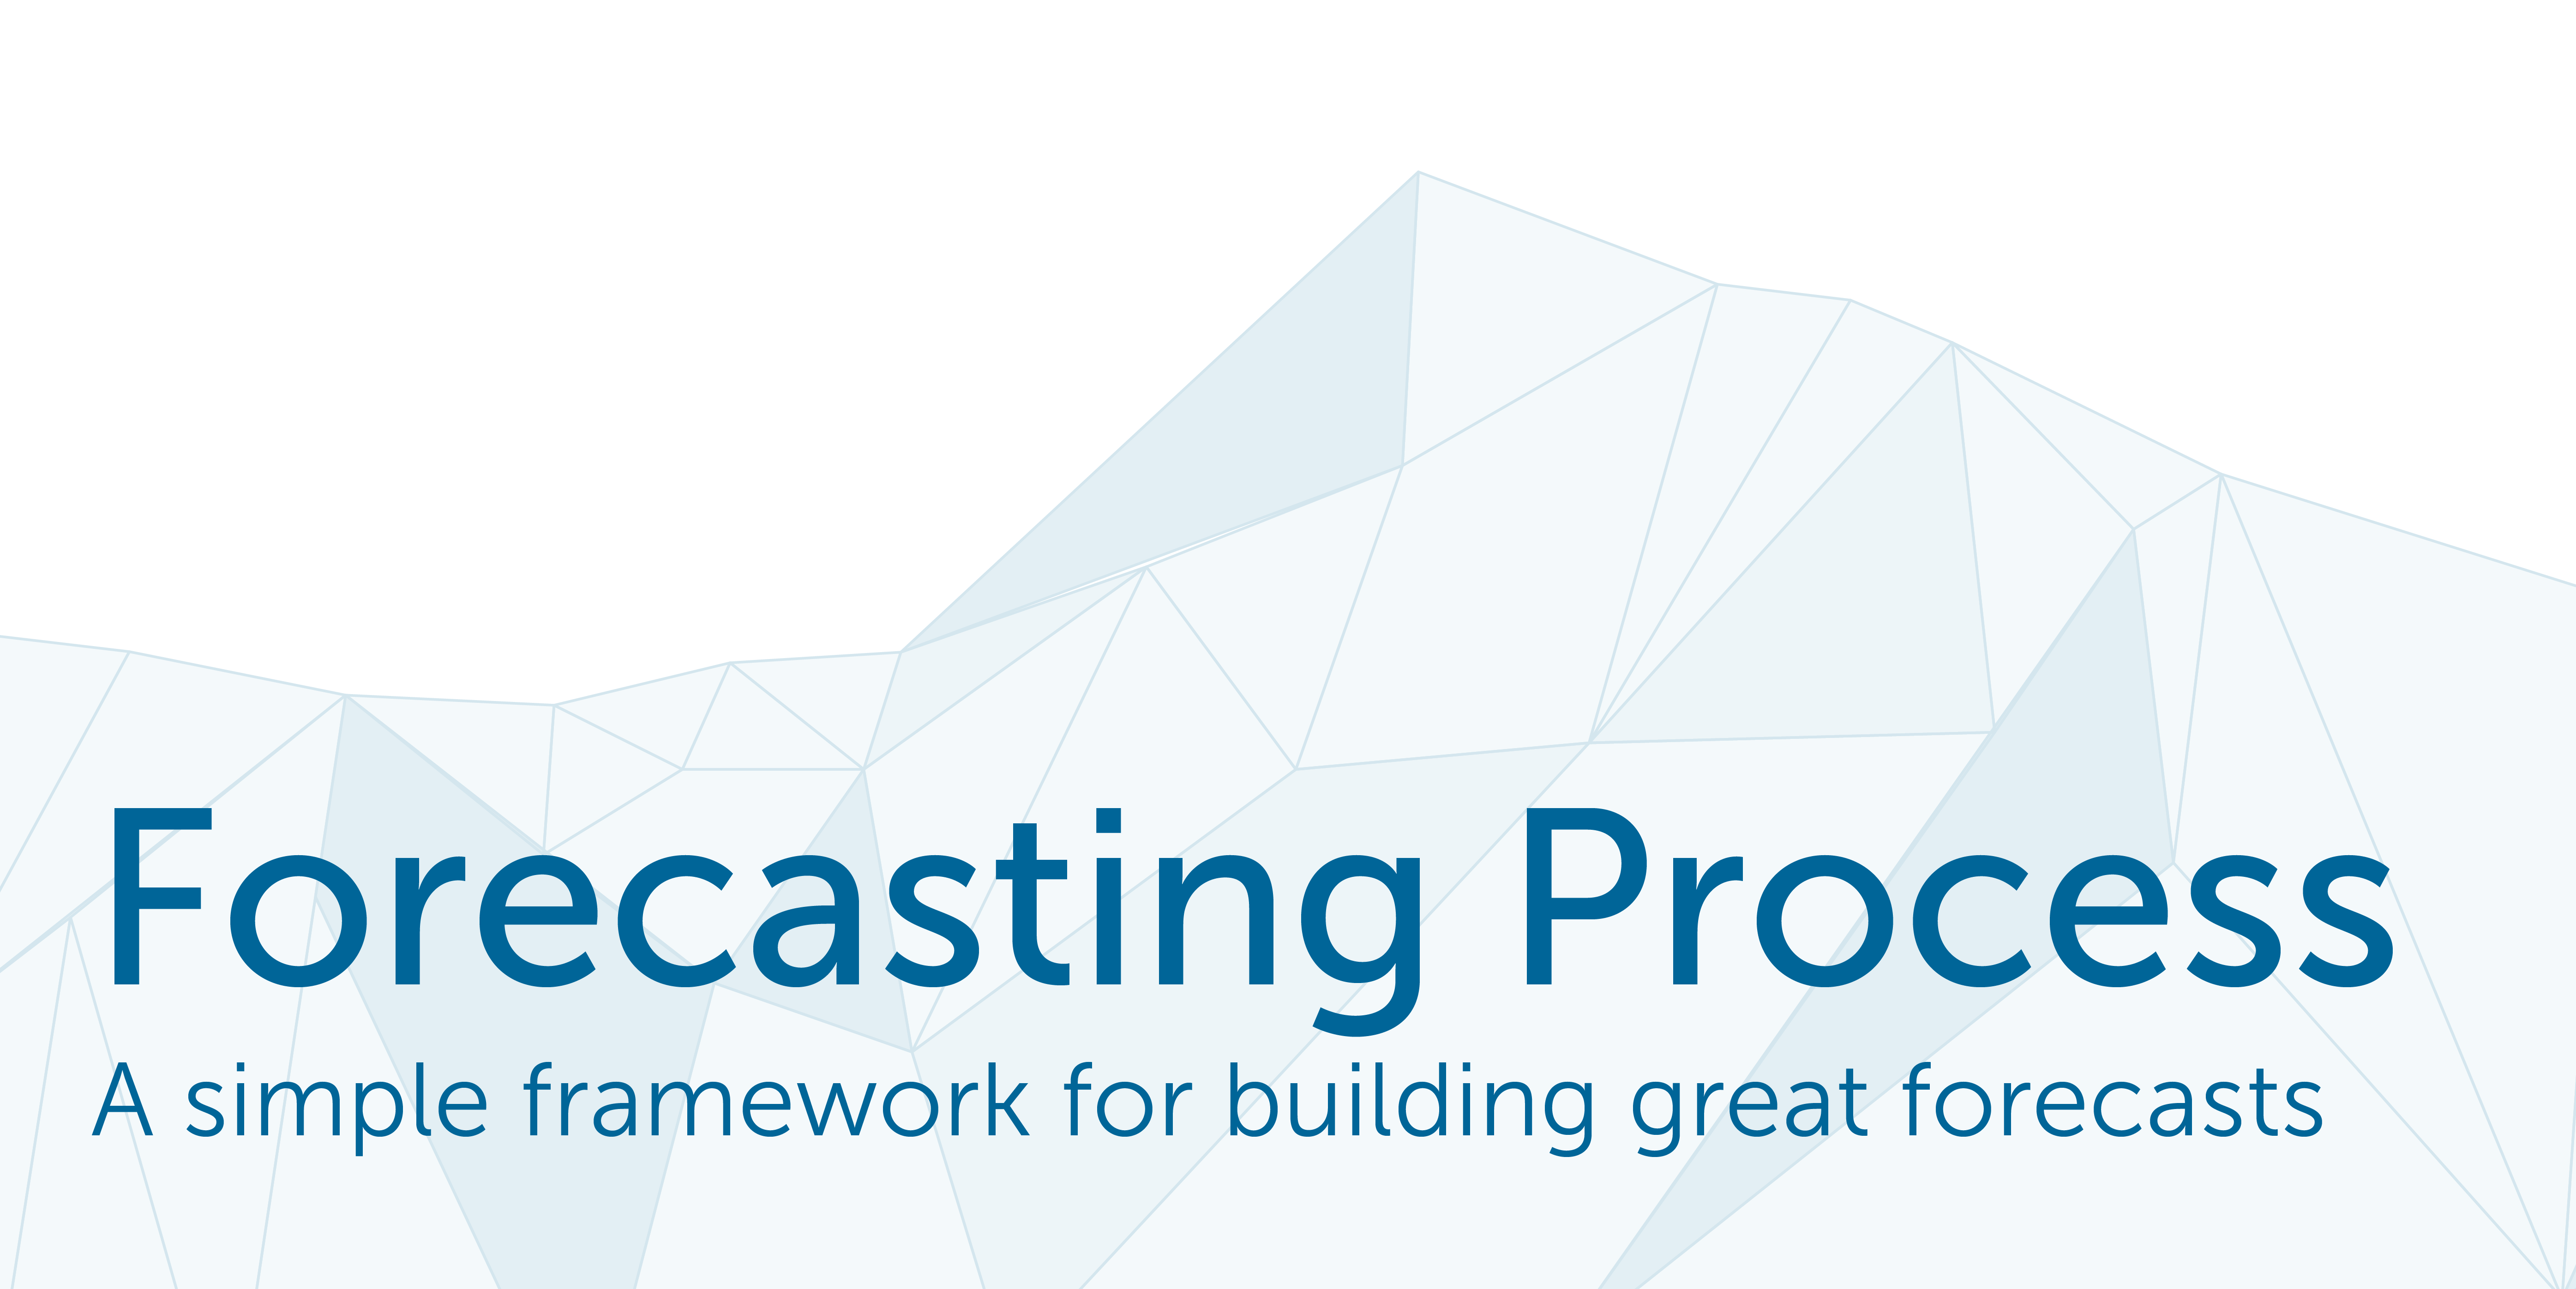 Forecasting Process – A simple framework for building great forecasts